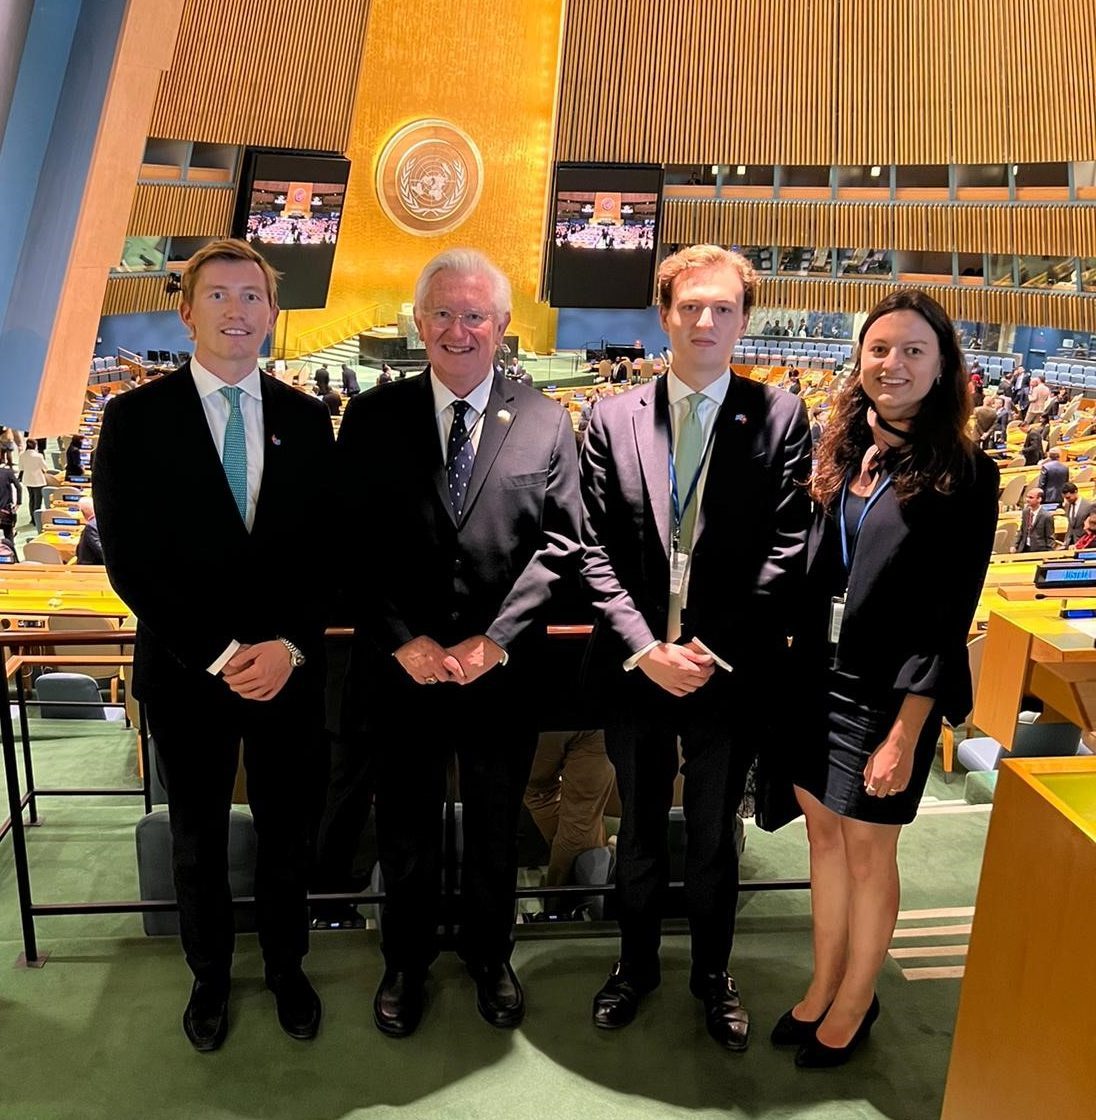 Permanent Observer Mission attended the Opening of the 77th regular Session of the General Assembly